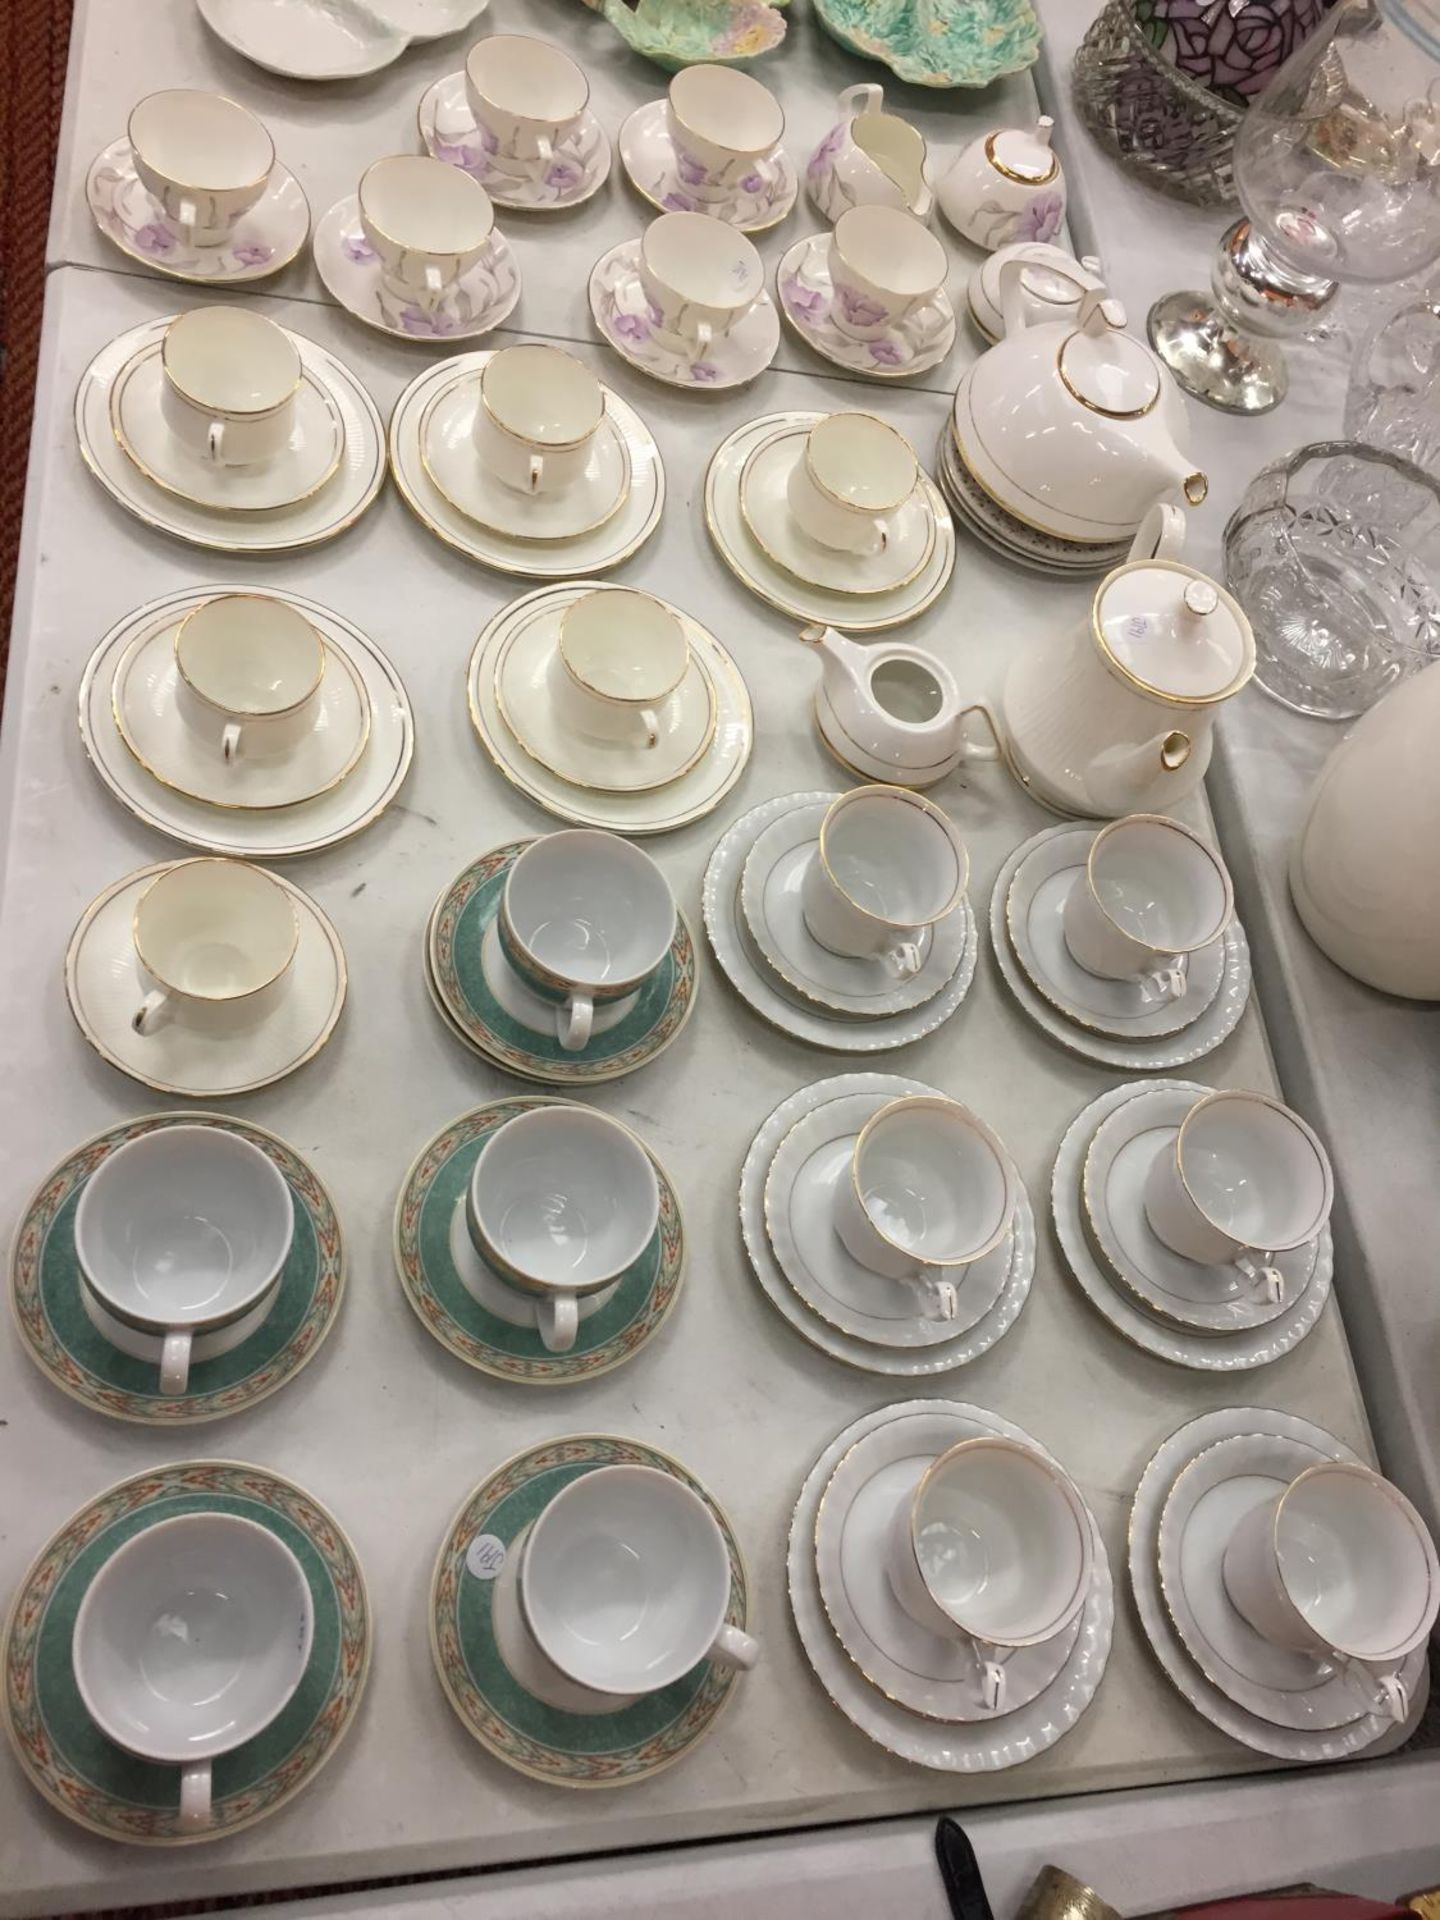 A LARGE COLLECTION OF VARIOUS TEA CUPS AND SAUCERS OF VARIOUS DESIGNS AND TWO TEAPOTS